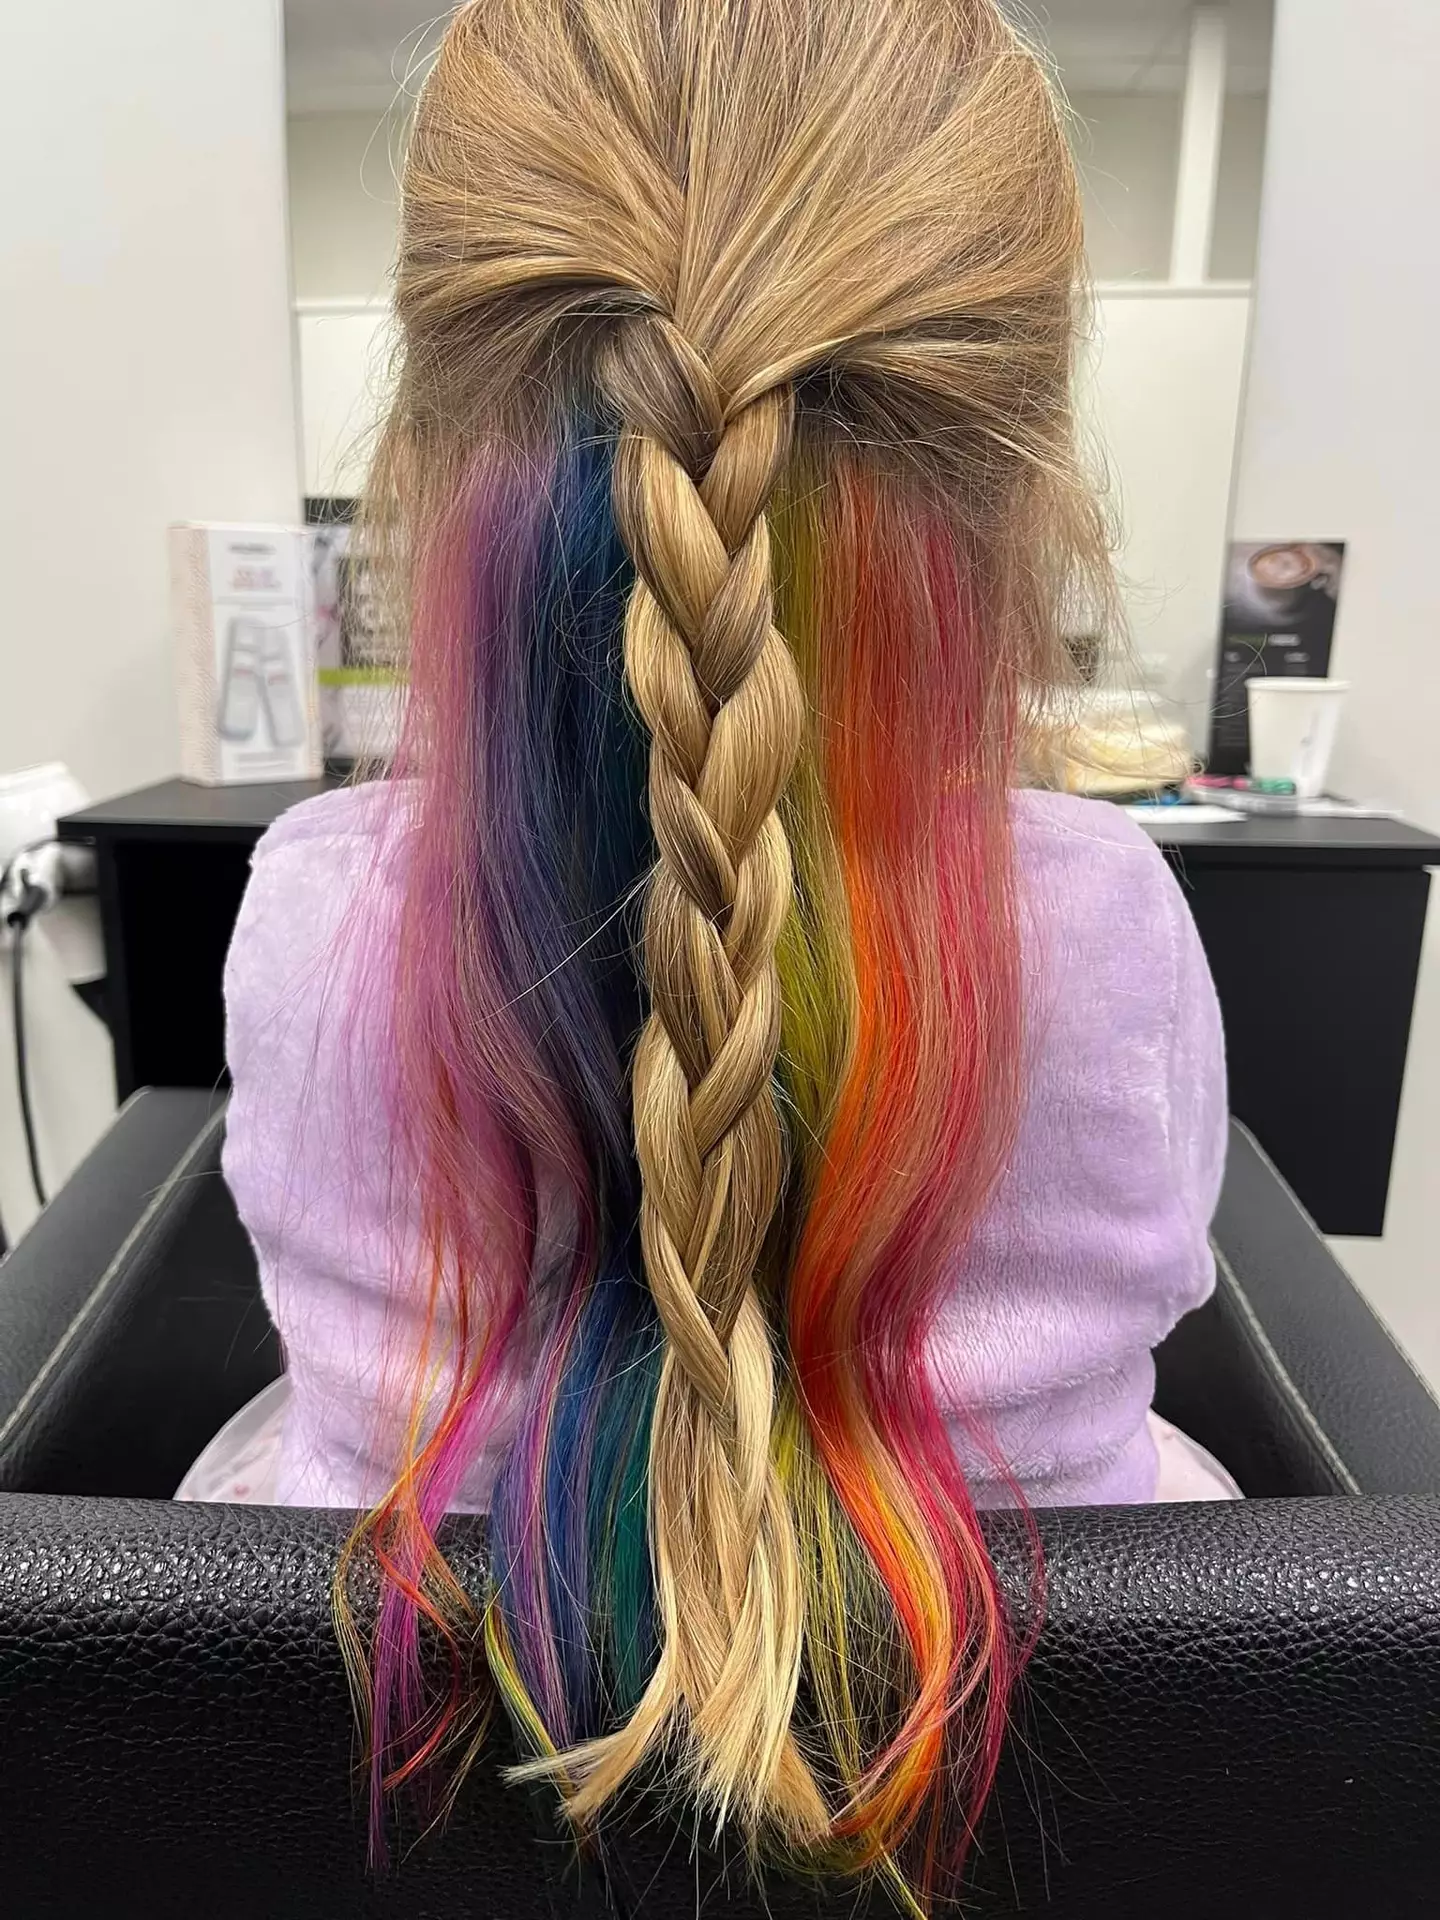 The four-year-old described herself as a 'unicorn' after getting her hair done.